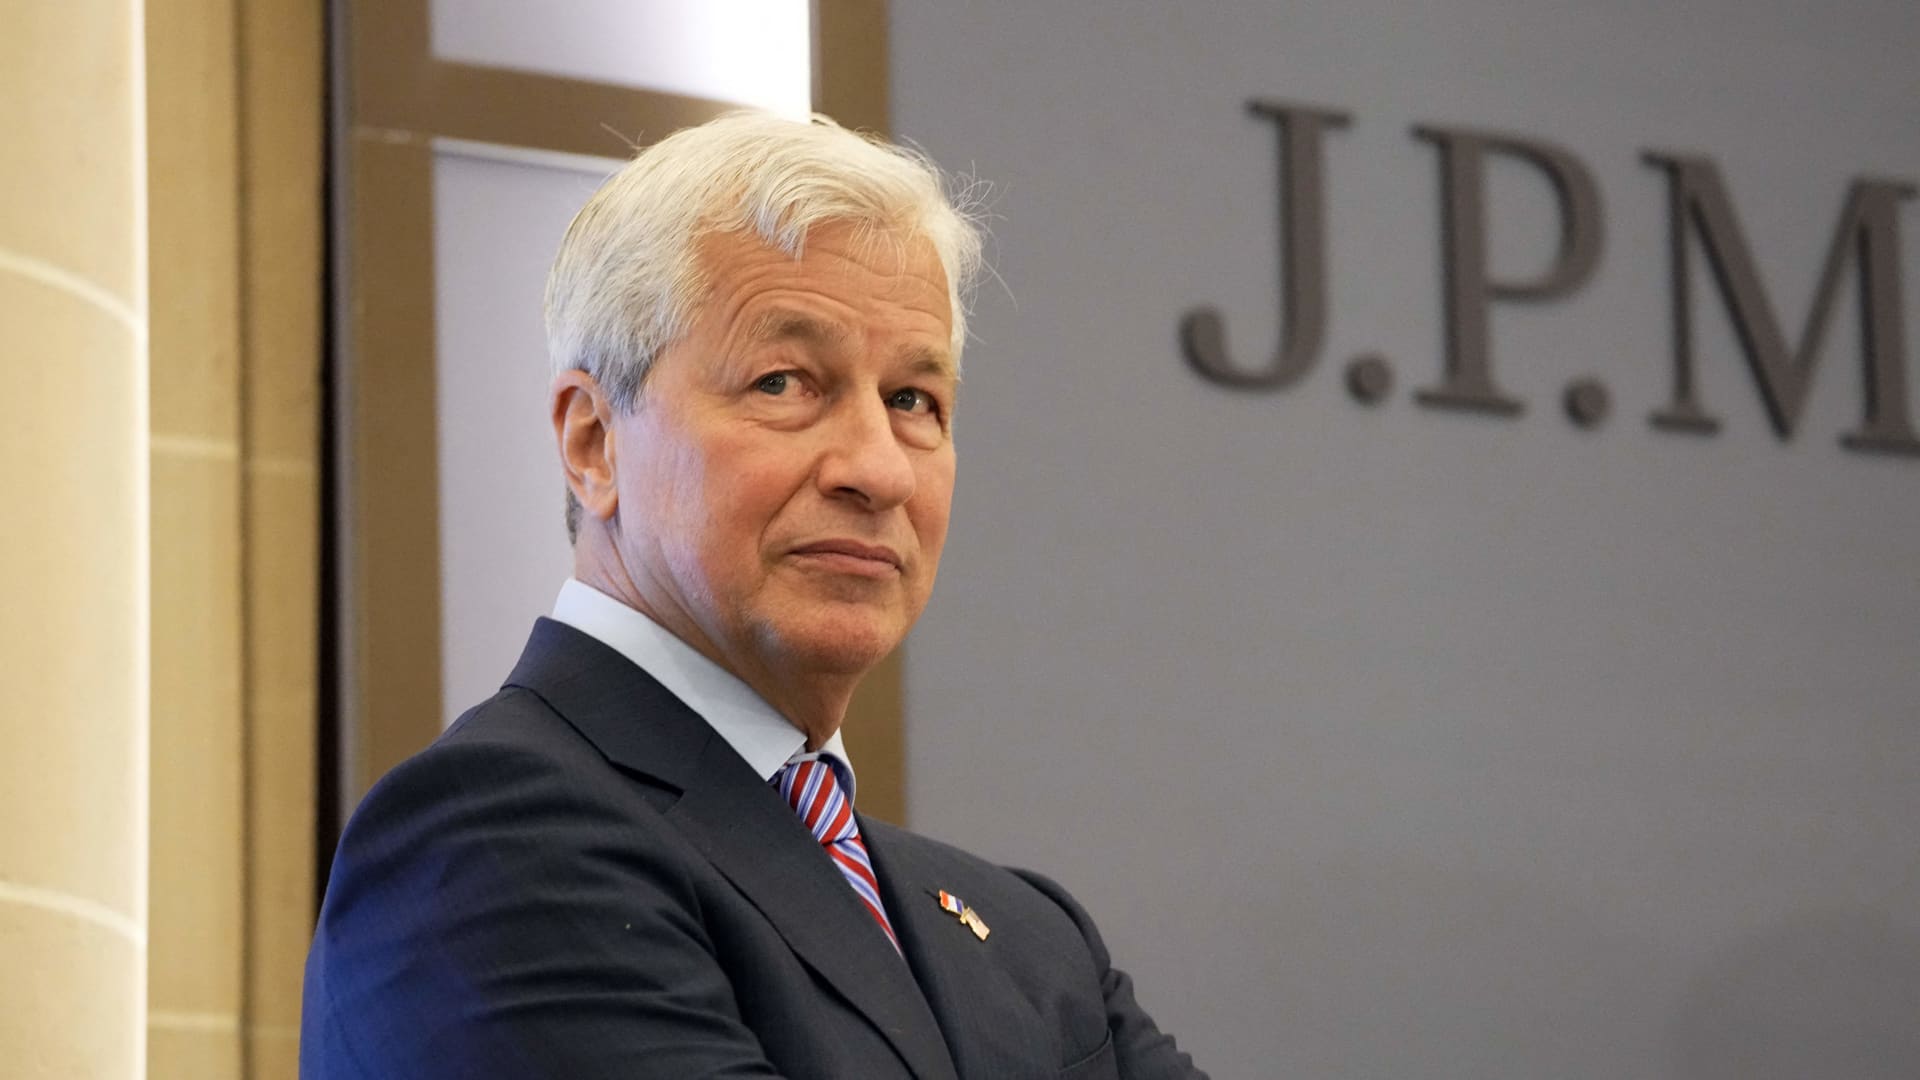 JPMorgan CEO Jamie Dimon suggests other financial institution exec could have booted Jeffrey Epstein as customer